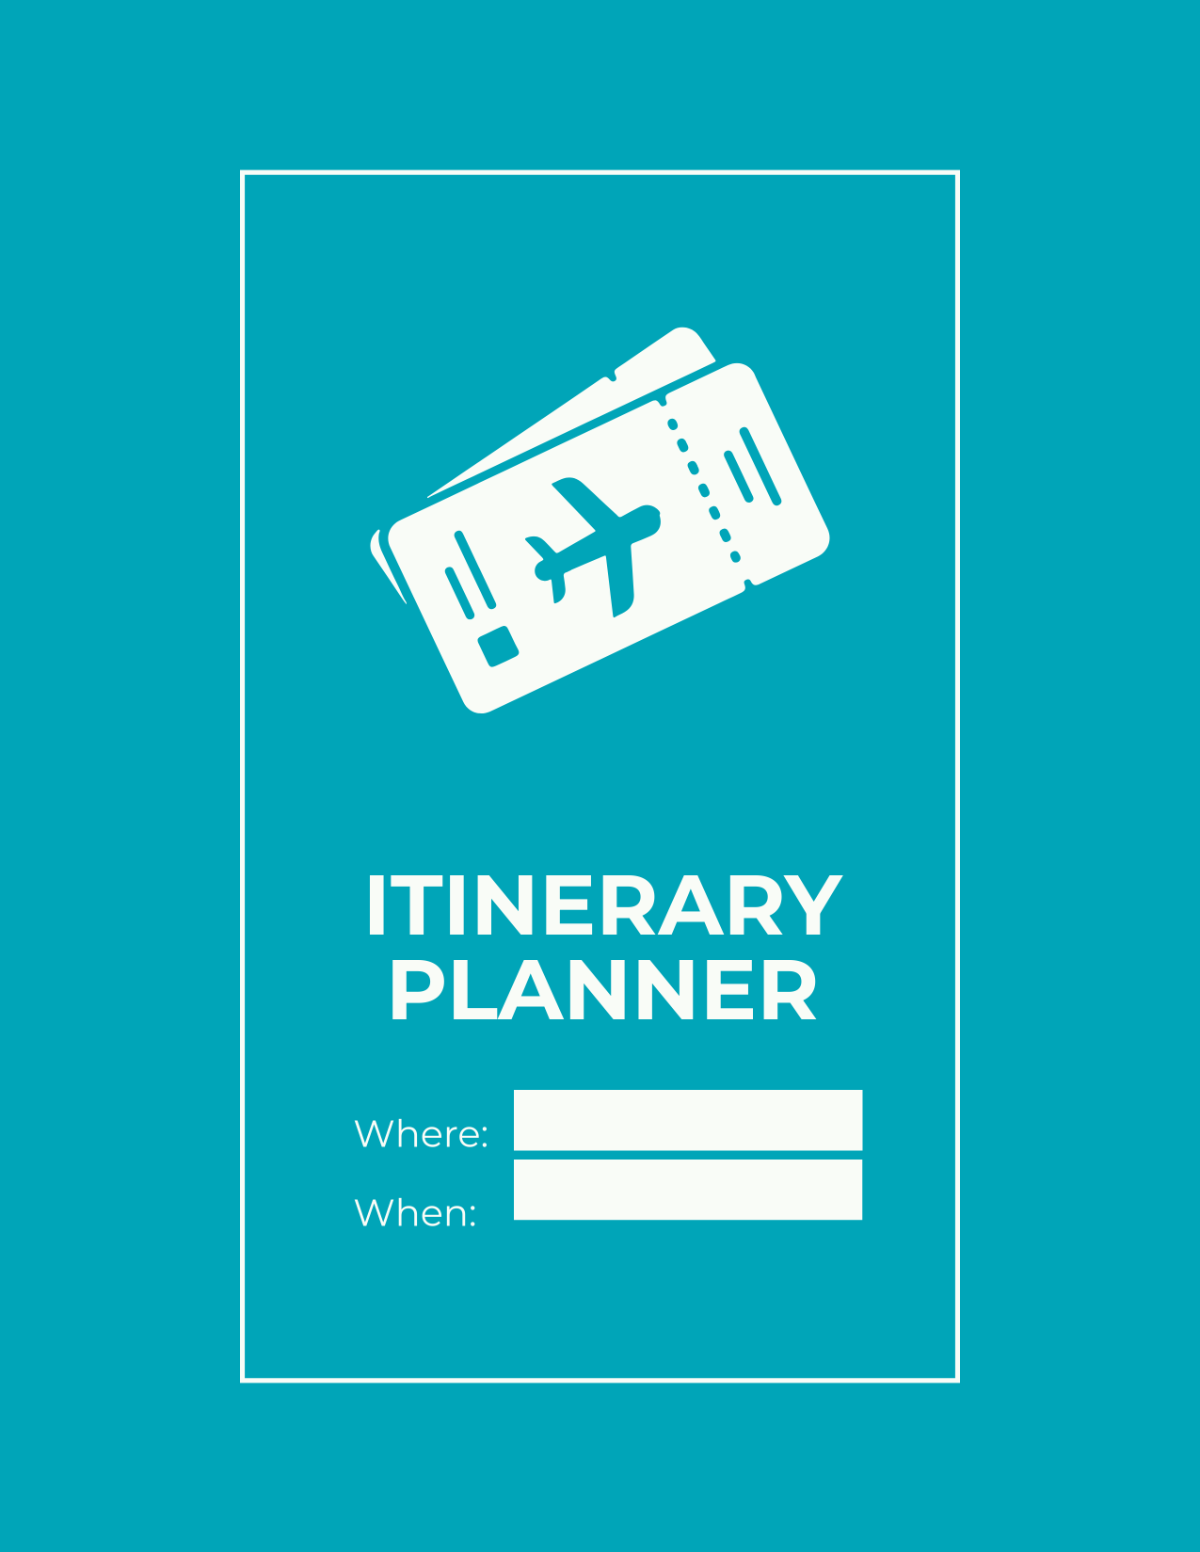 Basic Itinerary Planner Template